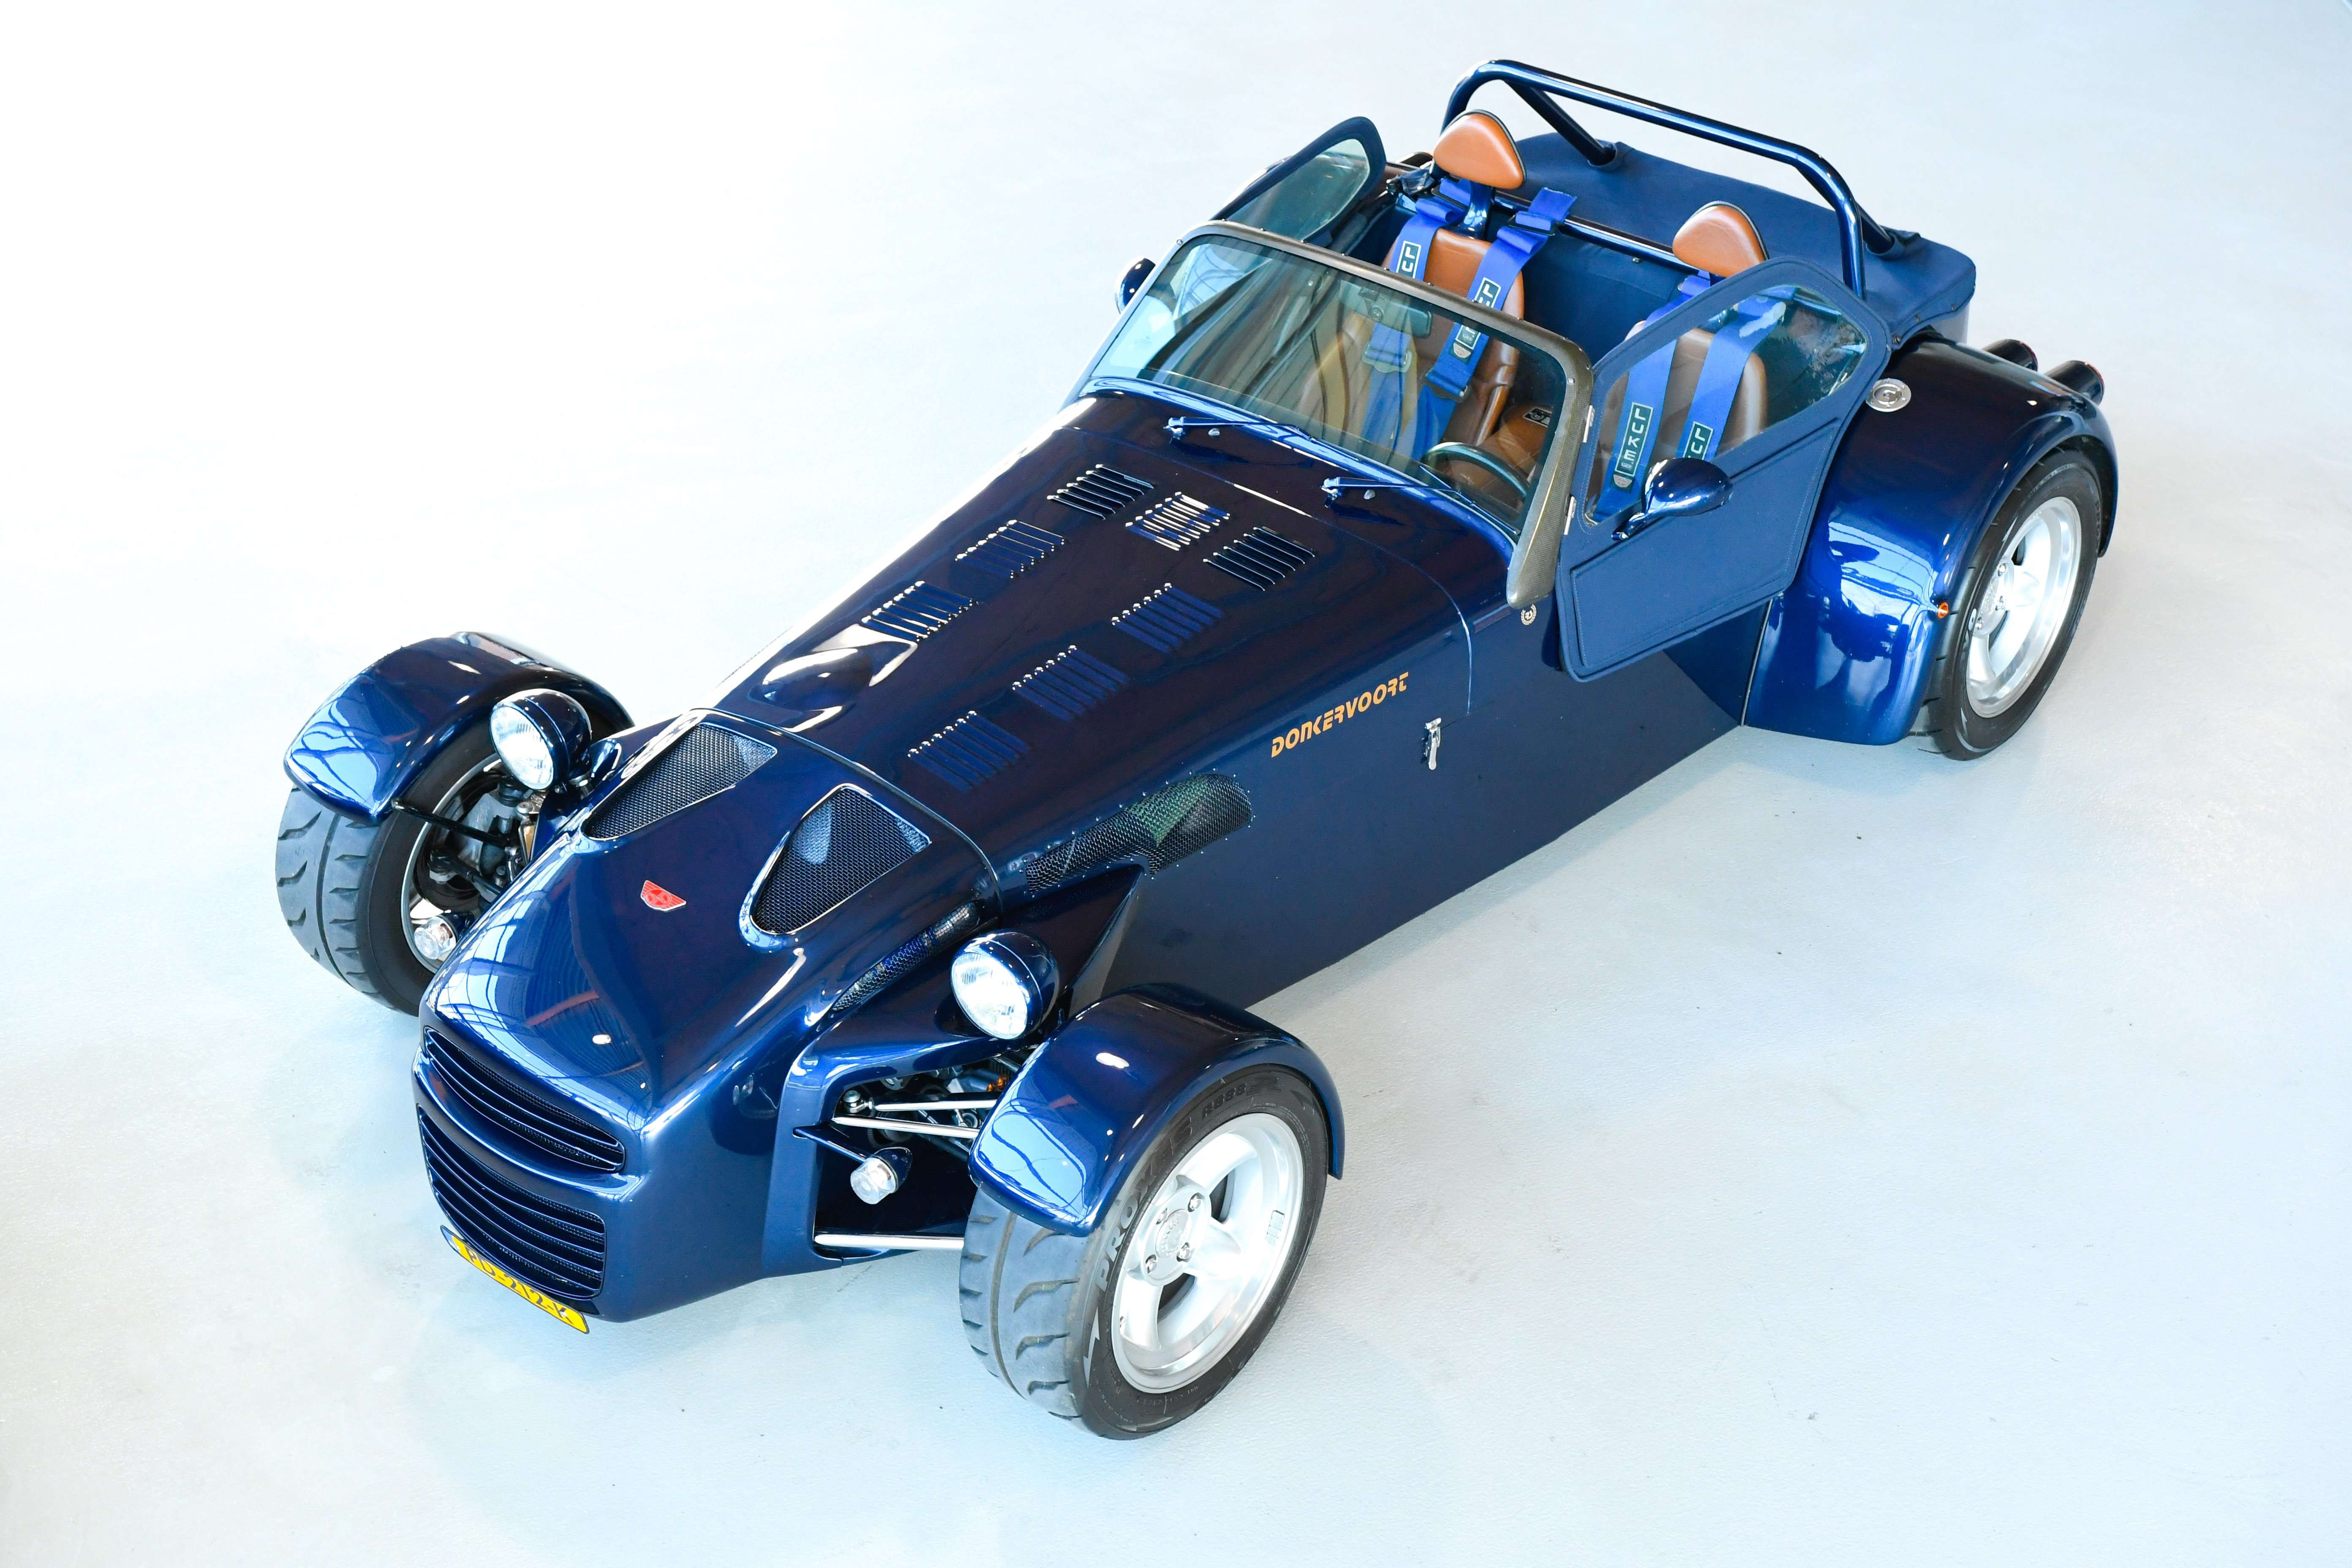 Donkervoort D8 Convertible in Blue used in LELYSTAD for € 84,900.-